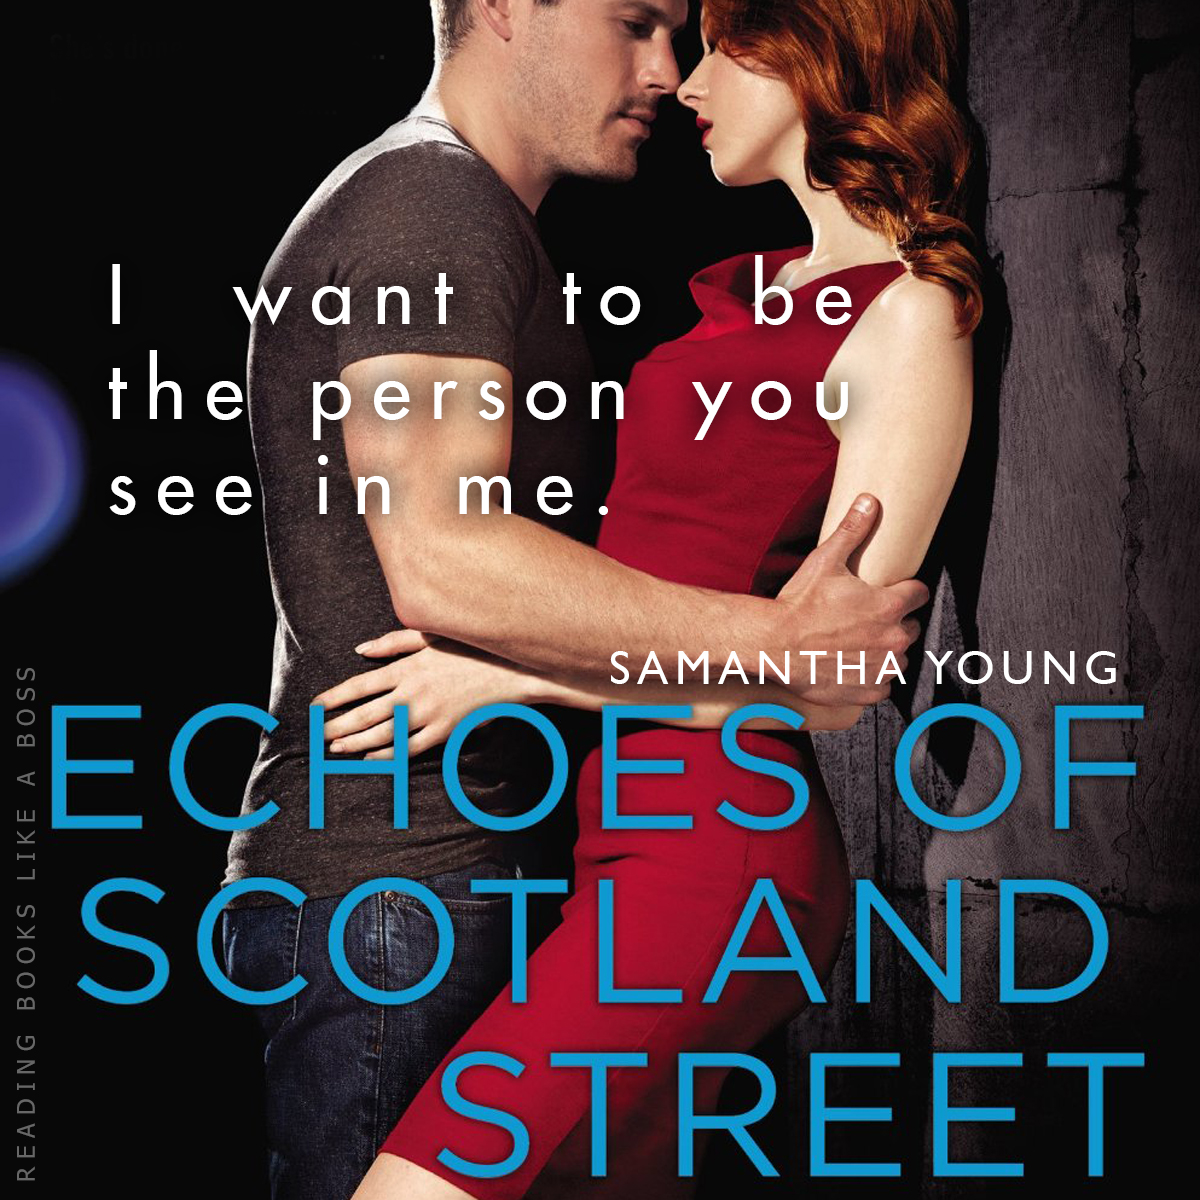 Echoes of Scotland Street by Samantha Young